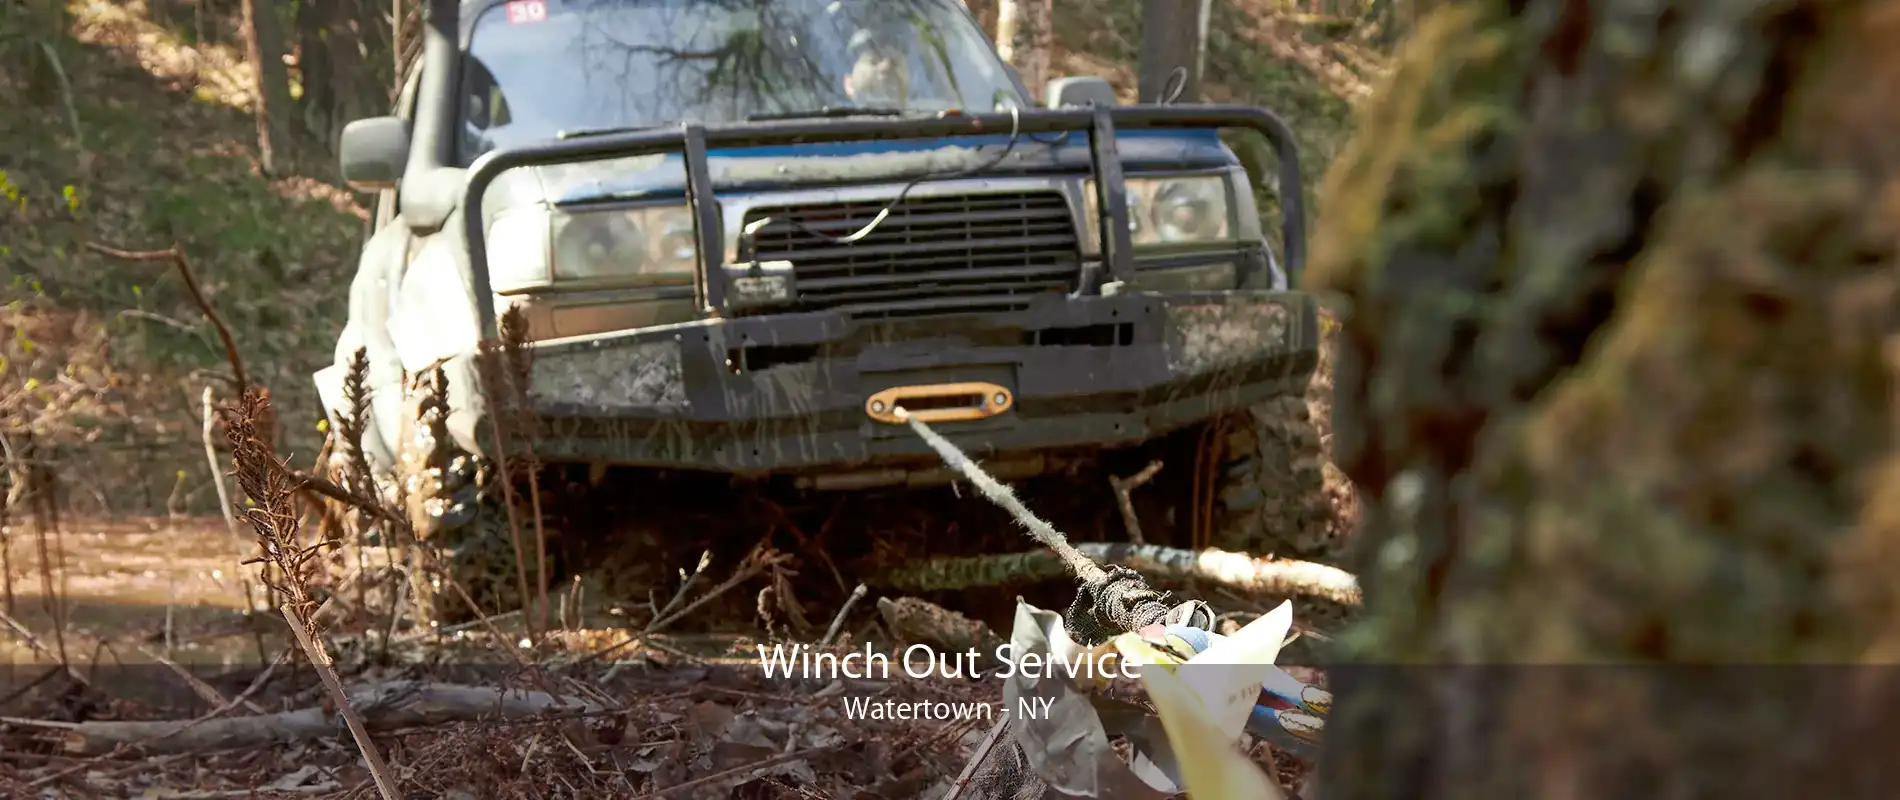 Winch Out Service Watertown - NY